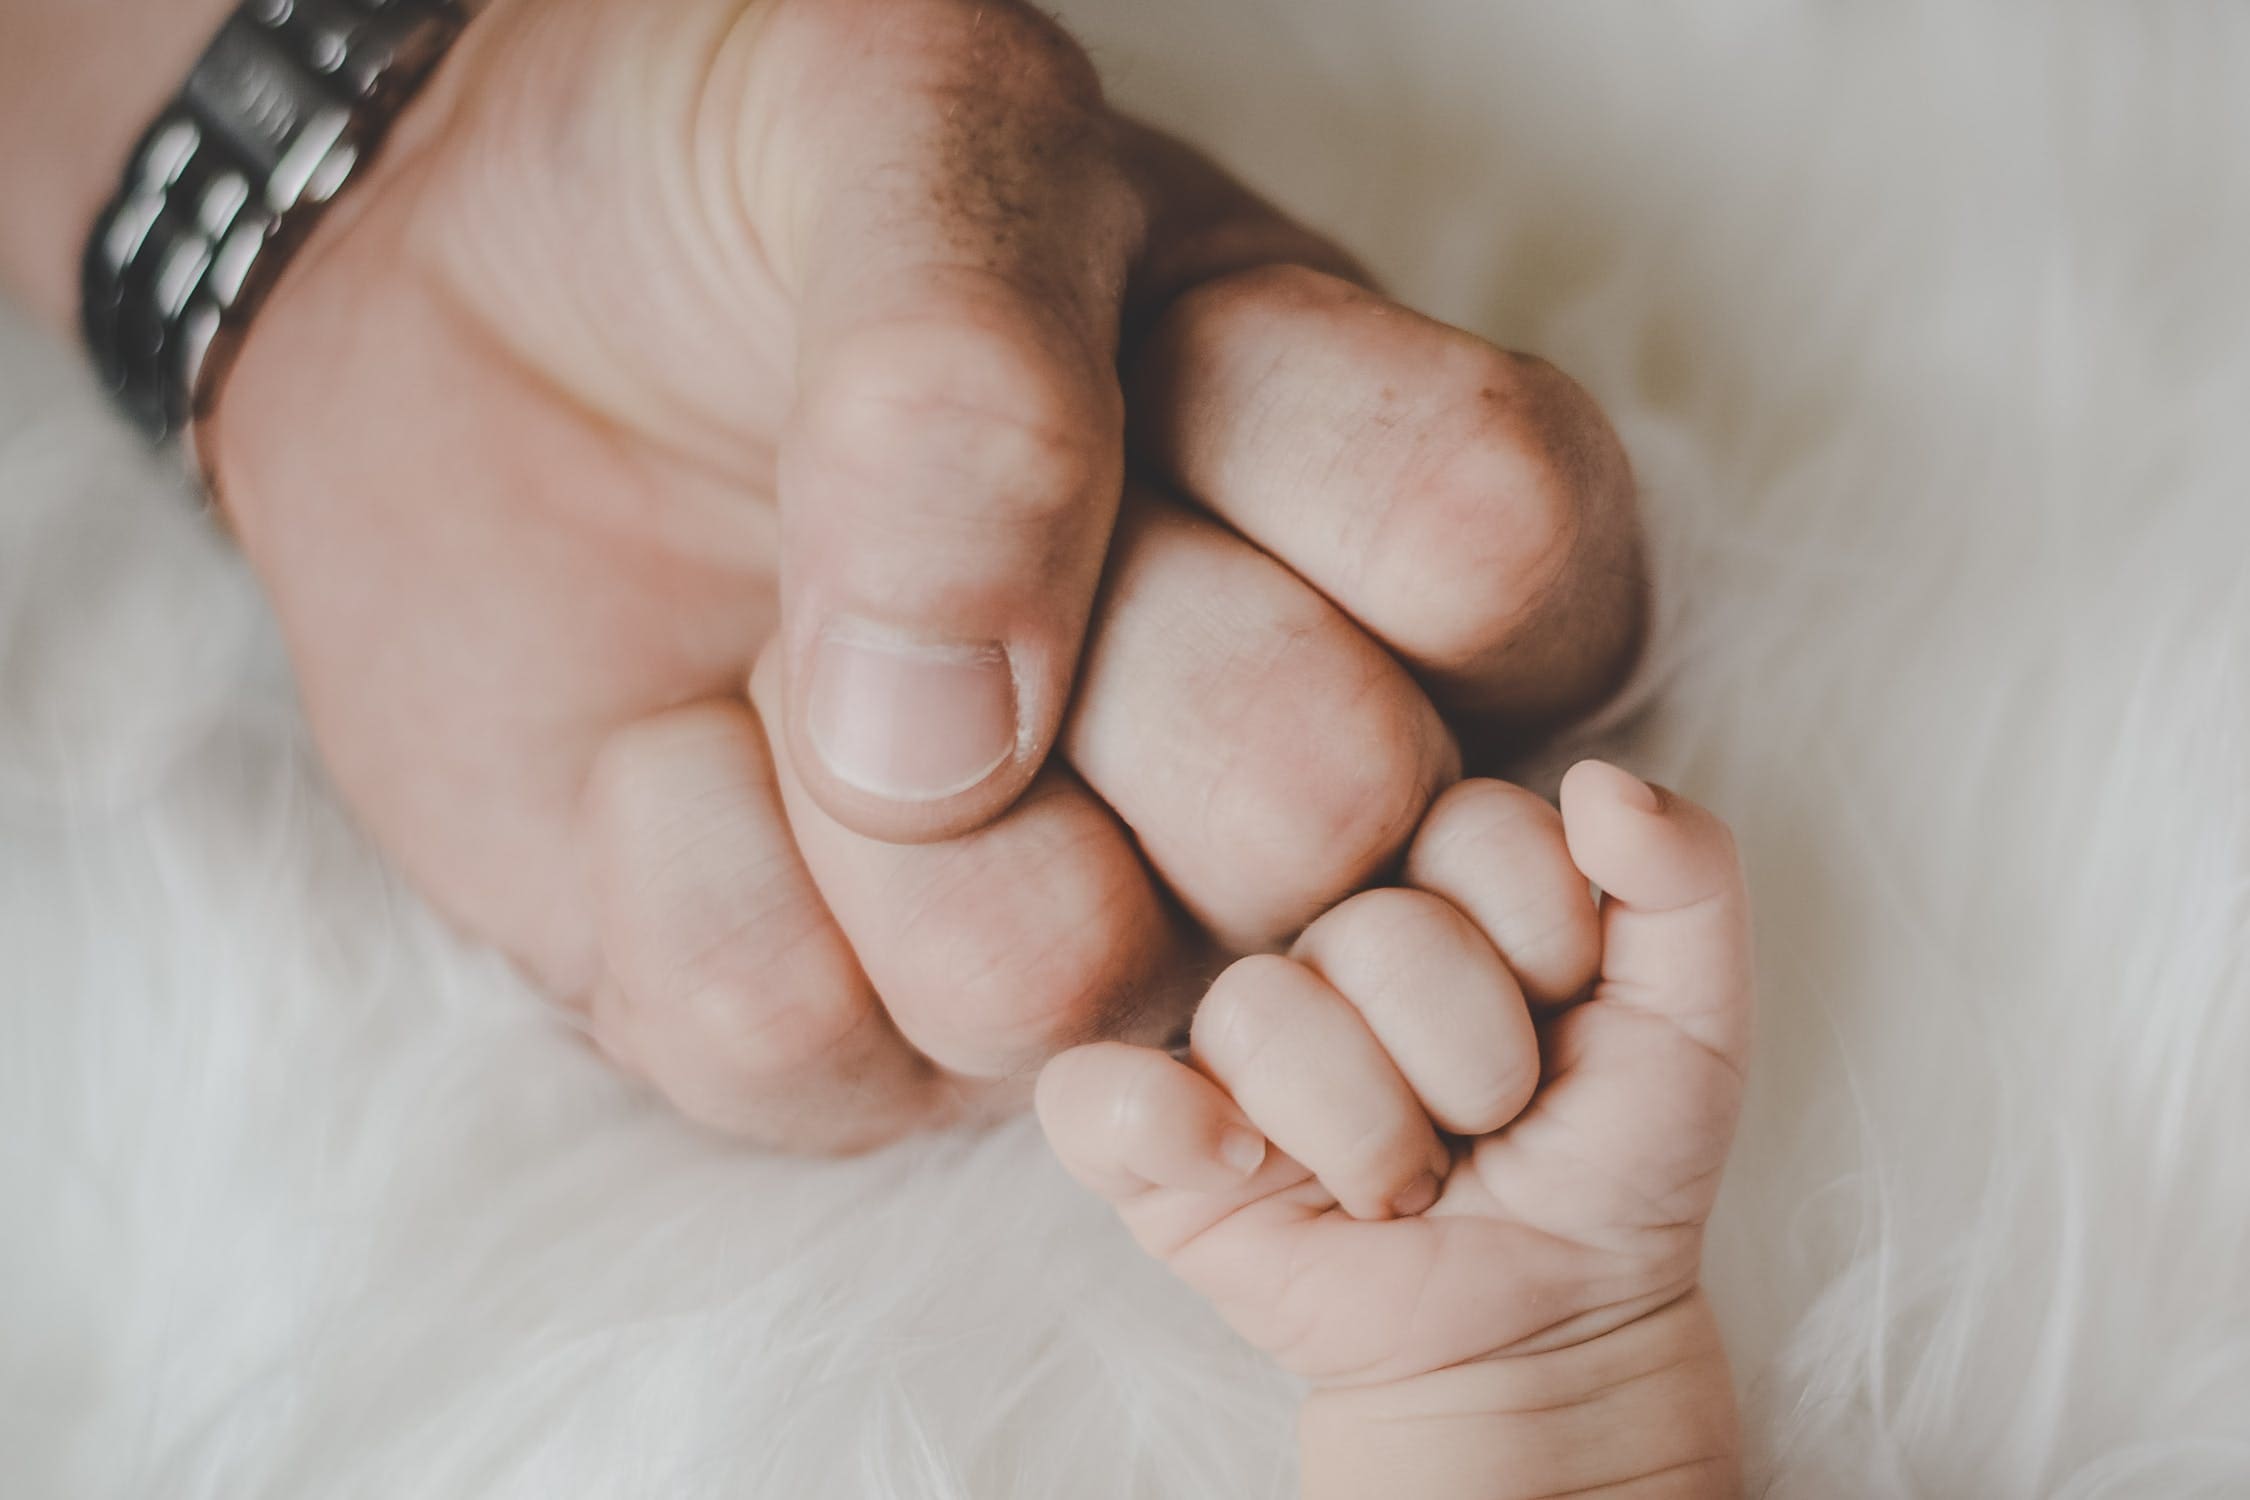 7 of The Best Ways For New Dad’s To Bond With Baby